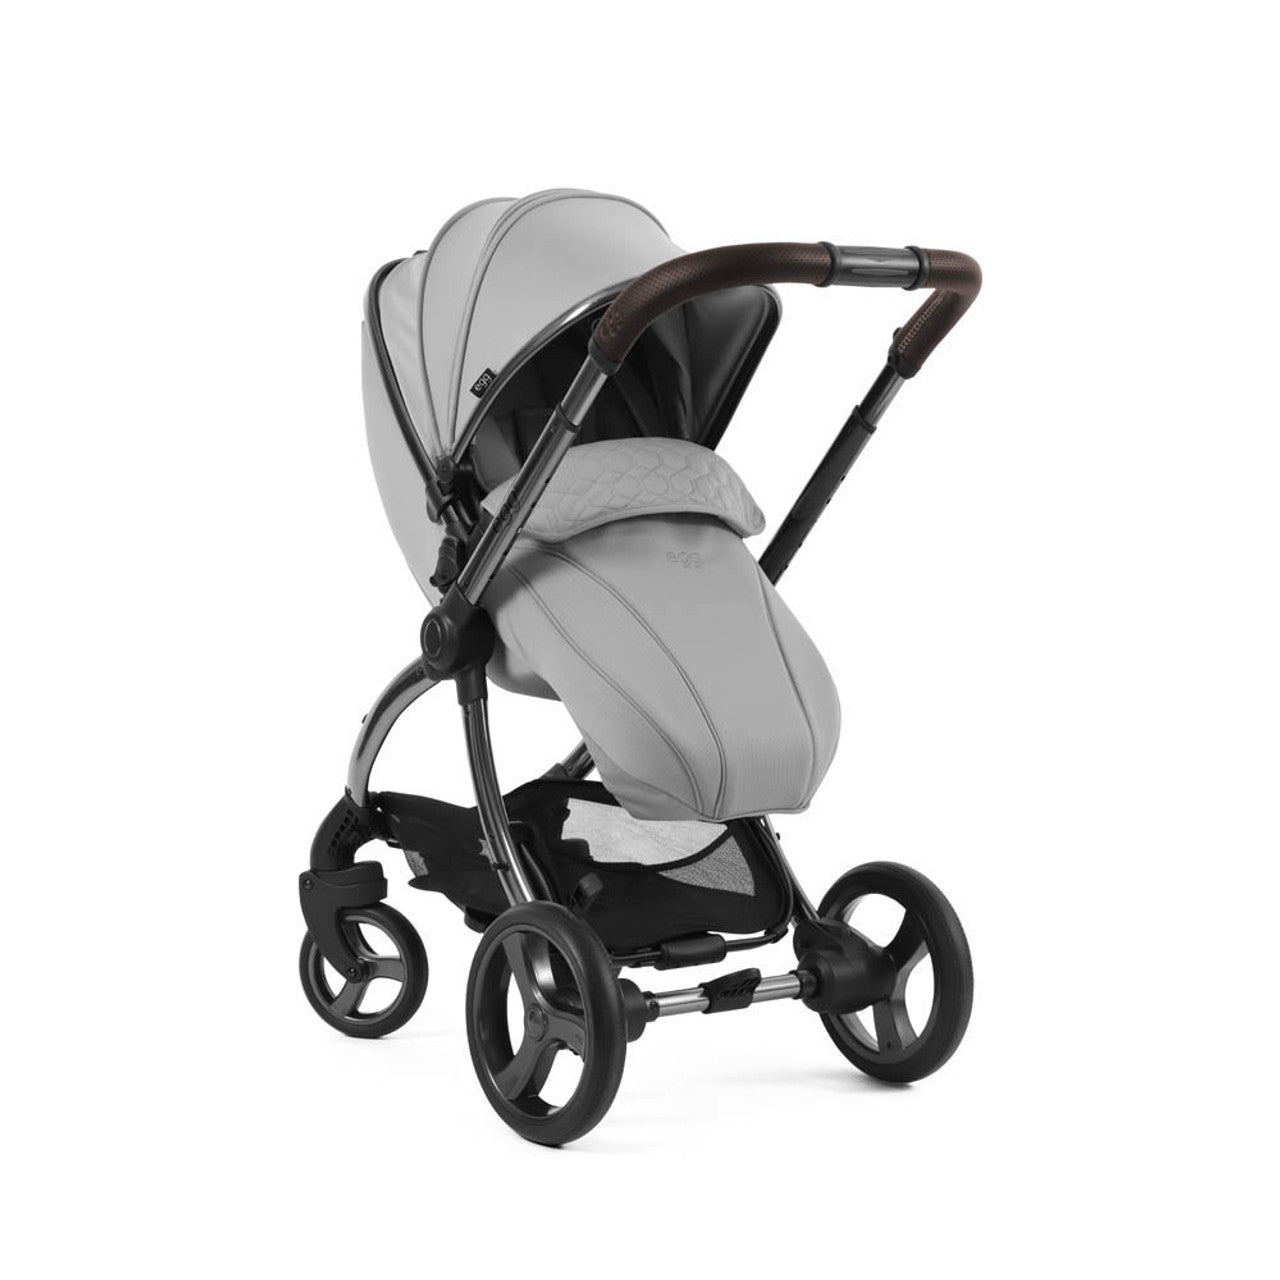 Egg® 3 Pushchair + Carrycot 2 in 1 Pram - Glacier -  | For Your Little One